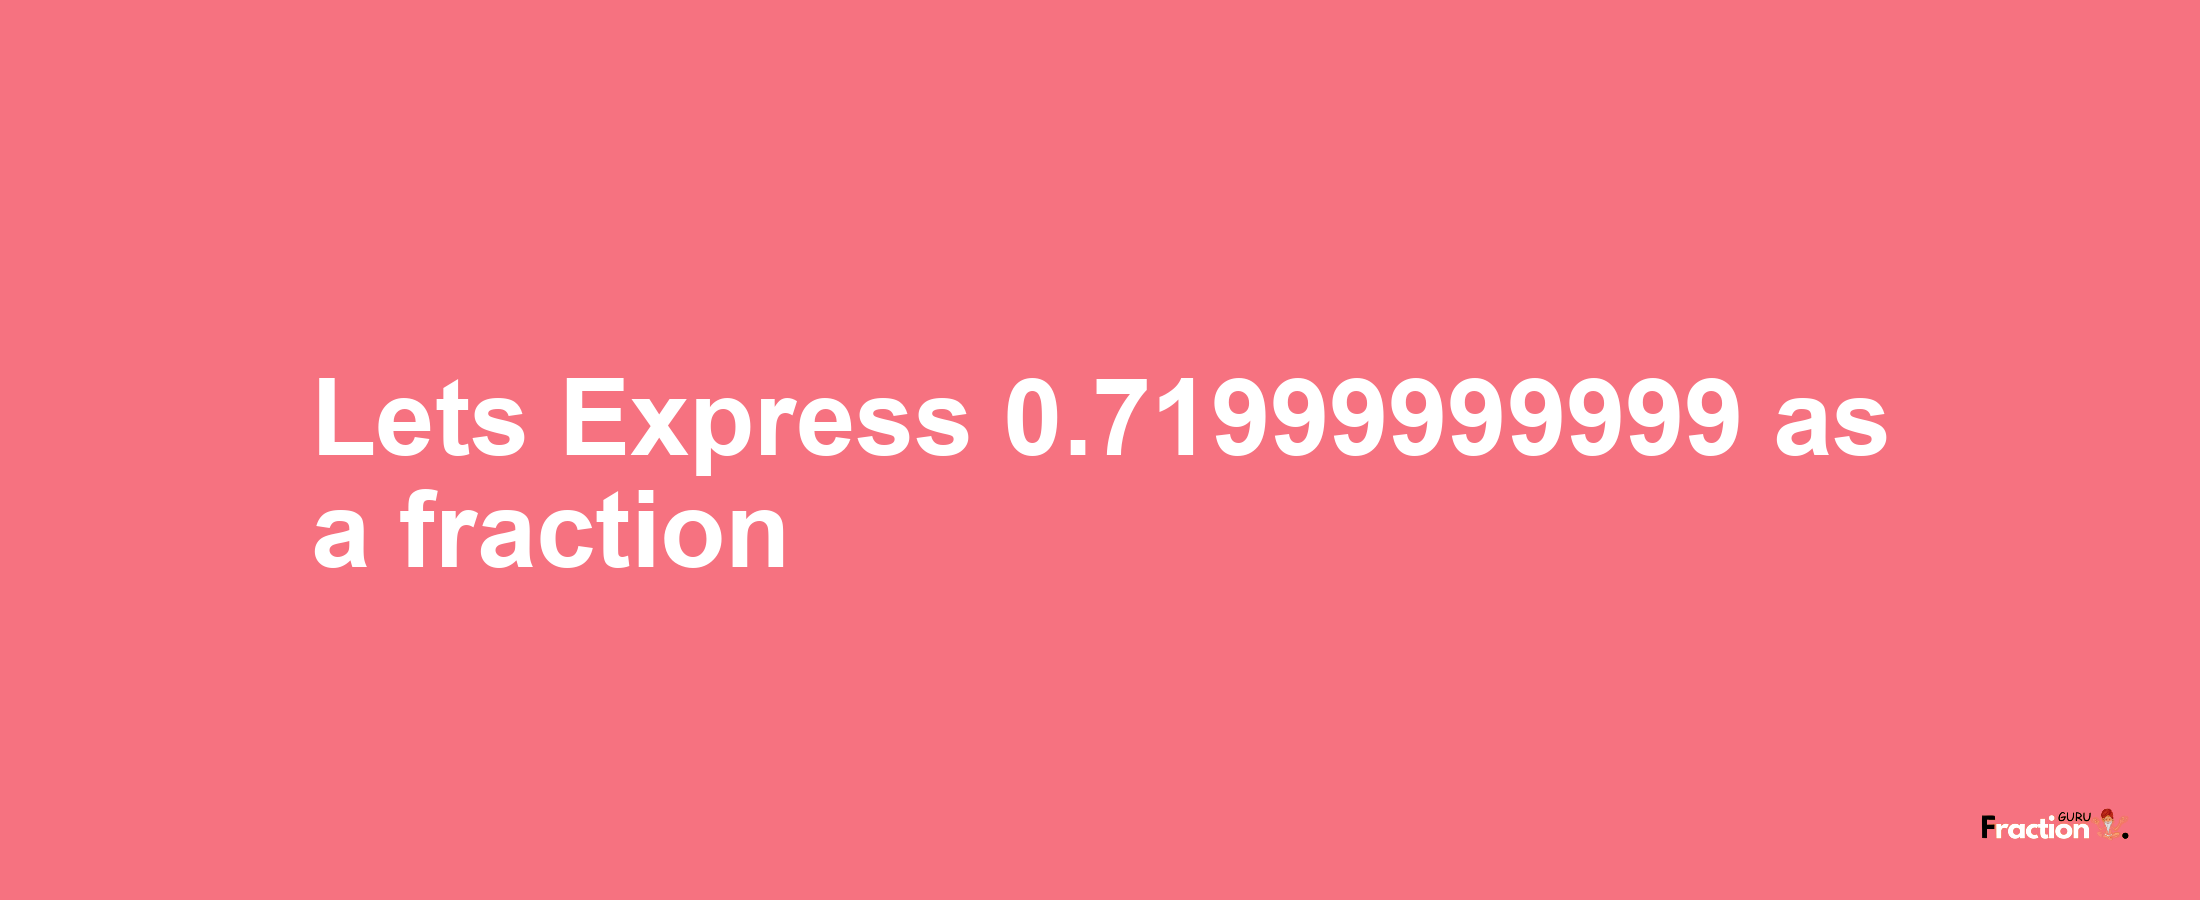 Lets Express 0.71999999999 as afraction